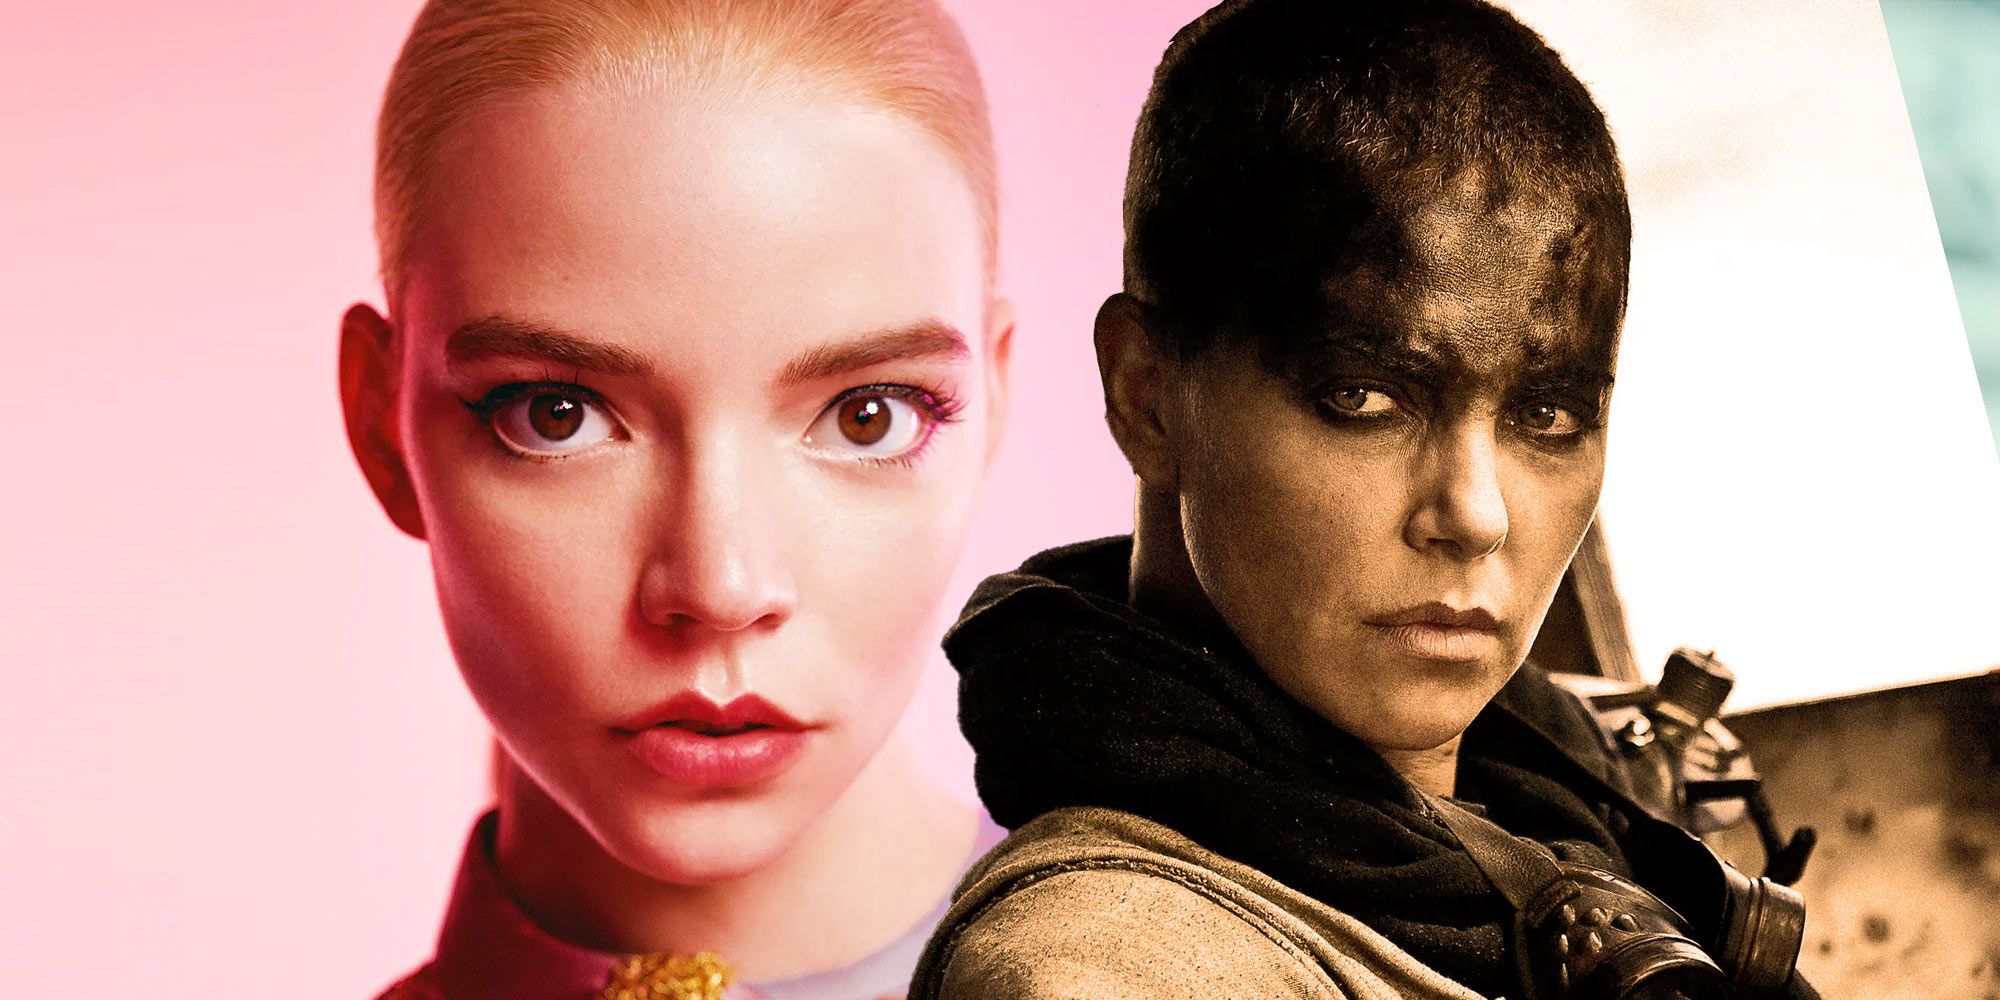 FandomWire - Anya Taylor-Joy's Furiosa will be very different from